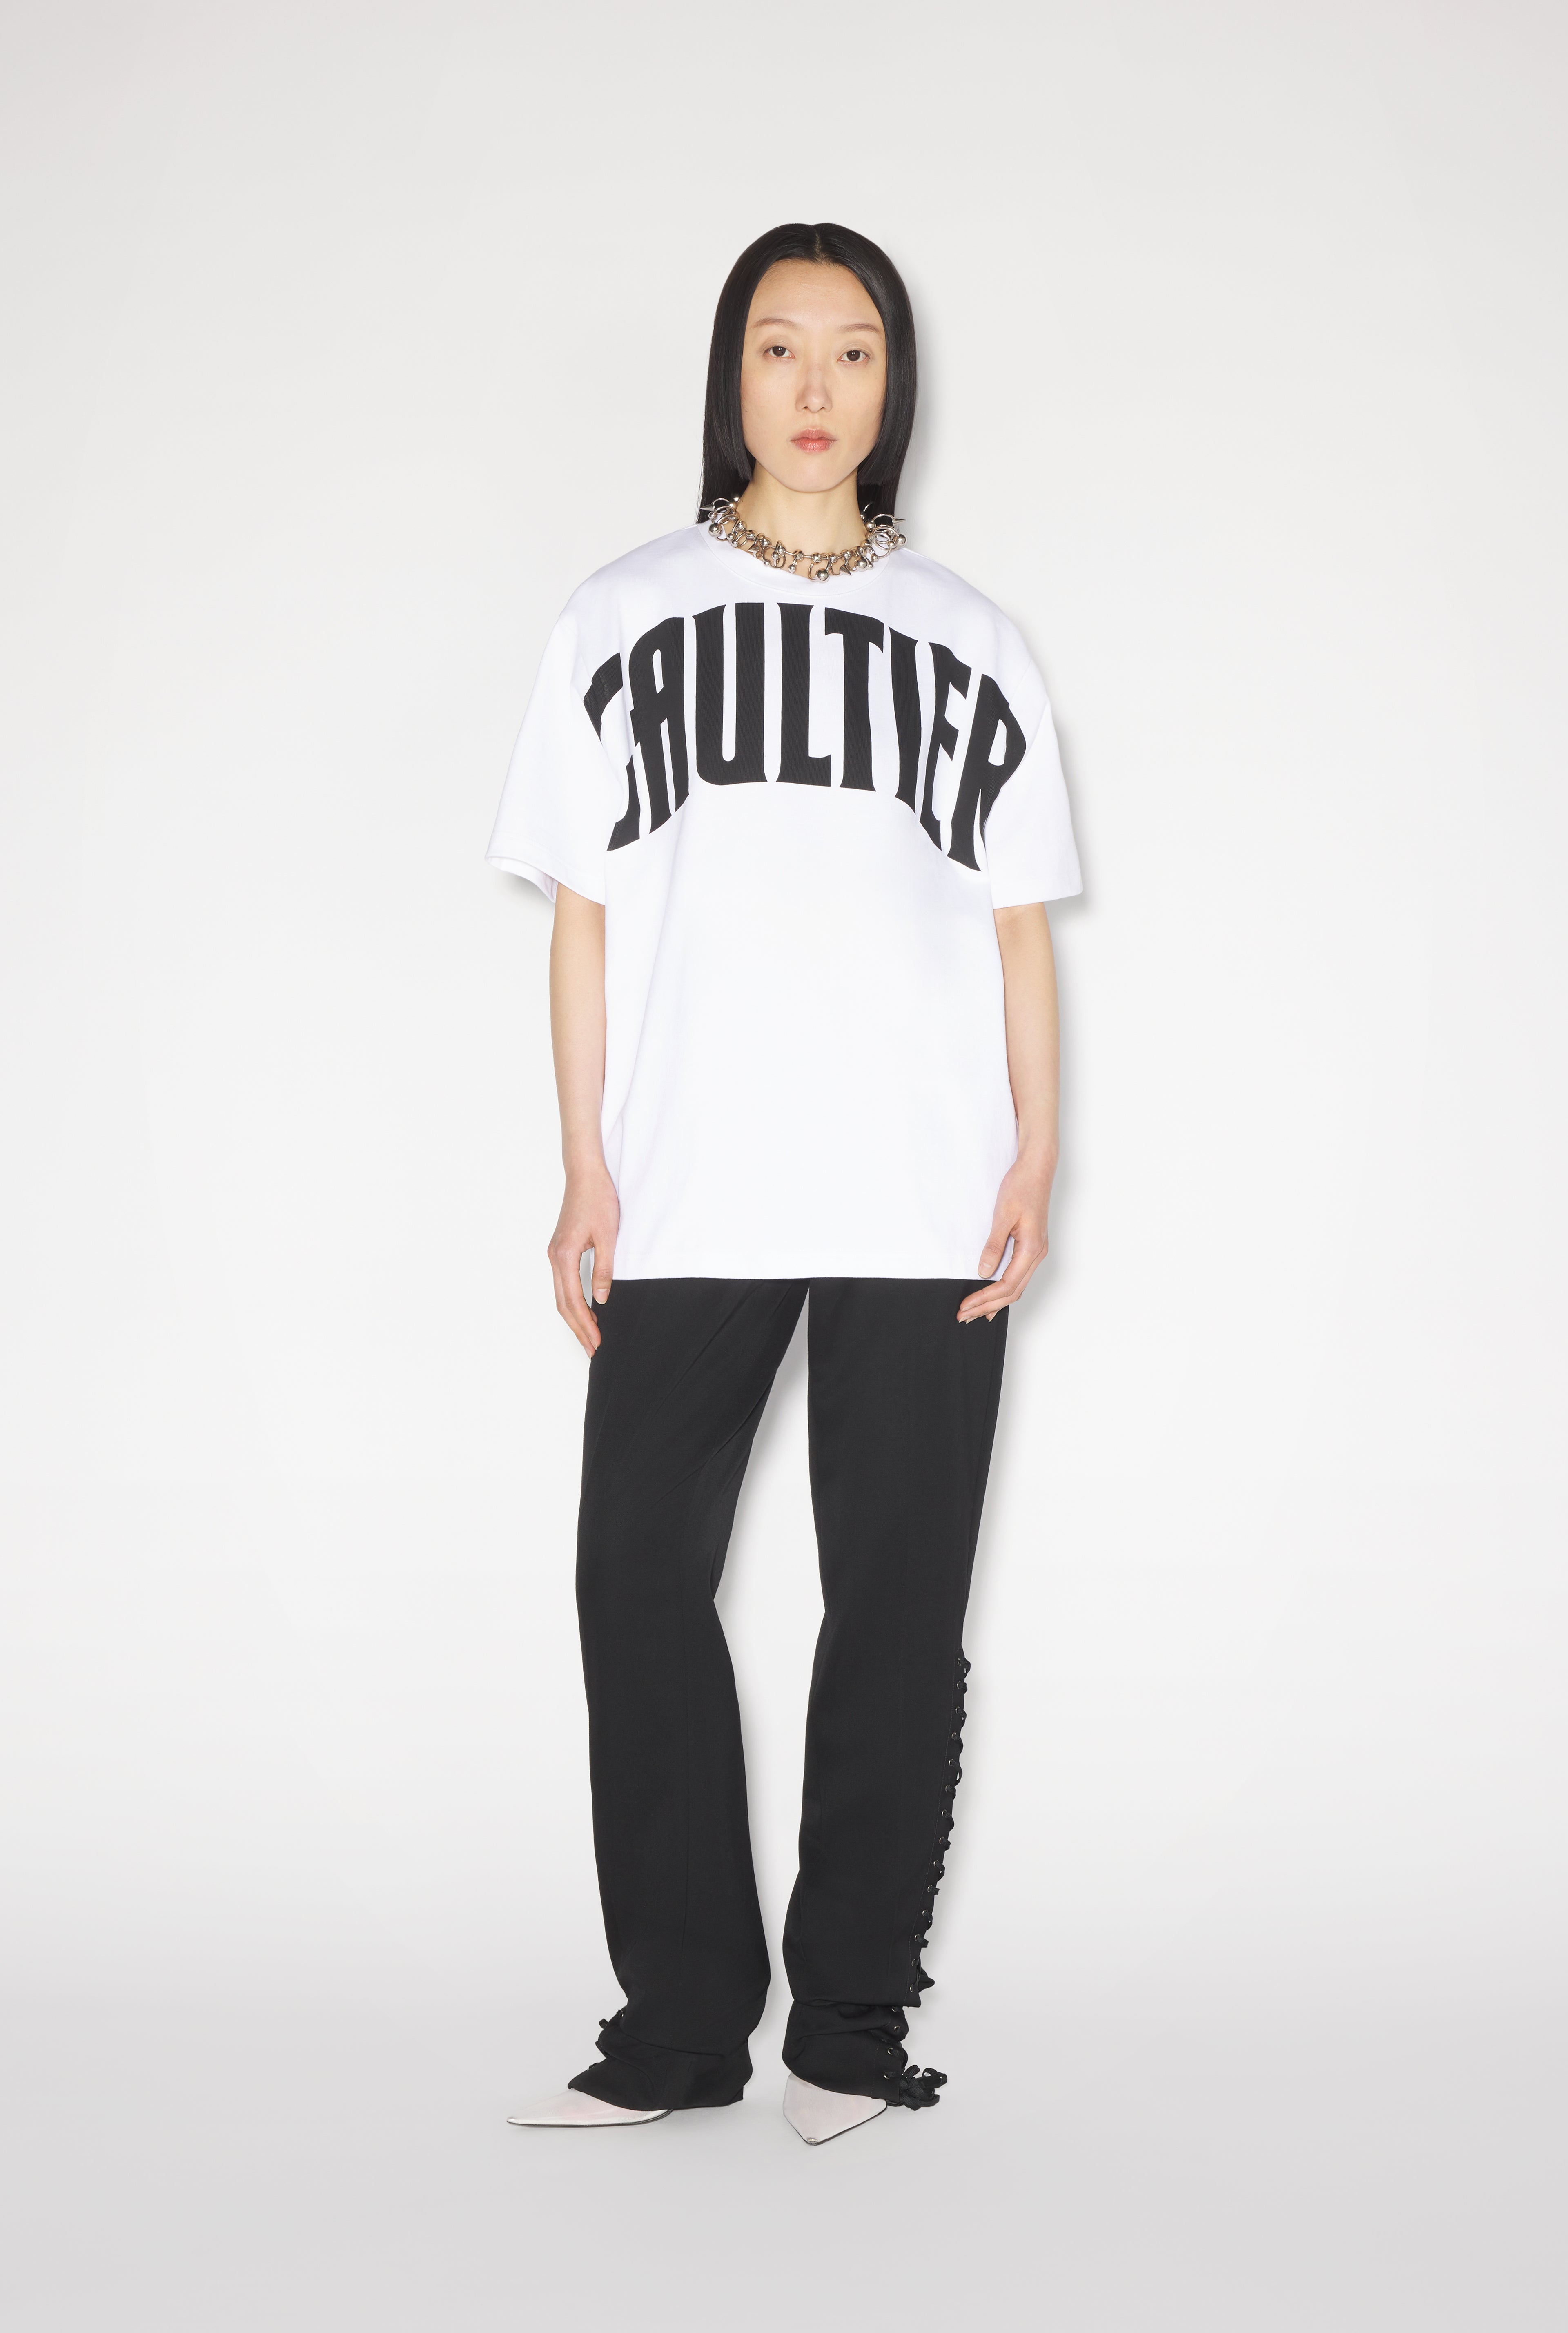 The Large White Gaultier T-Shirt